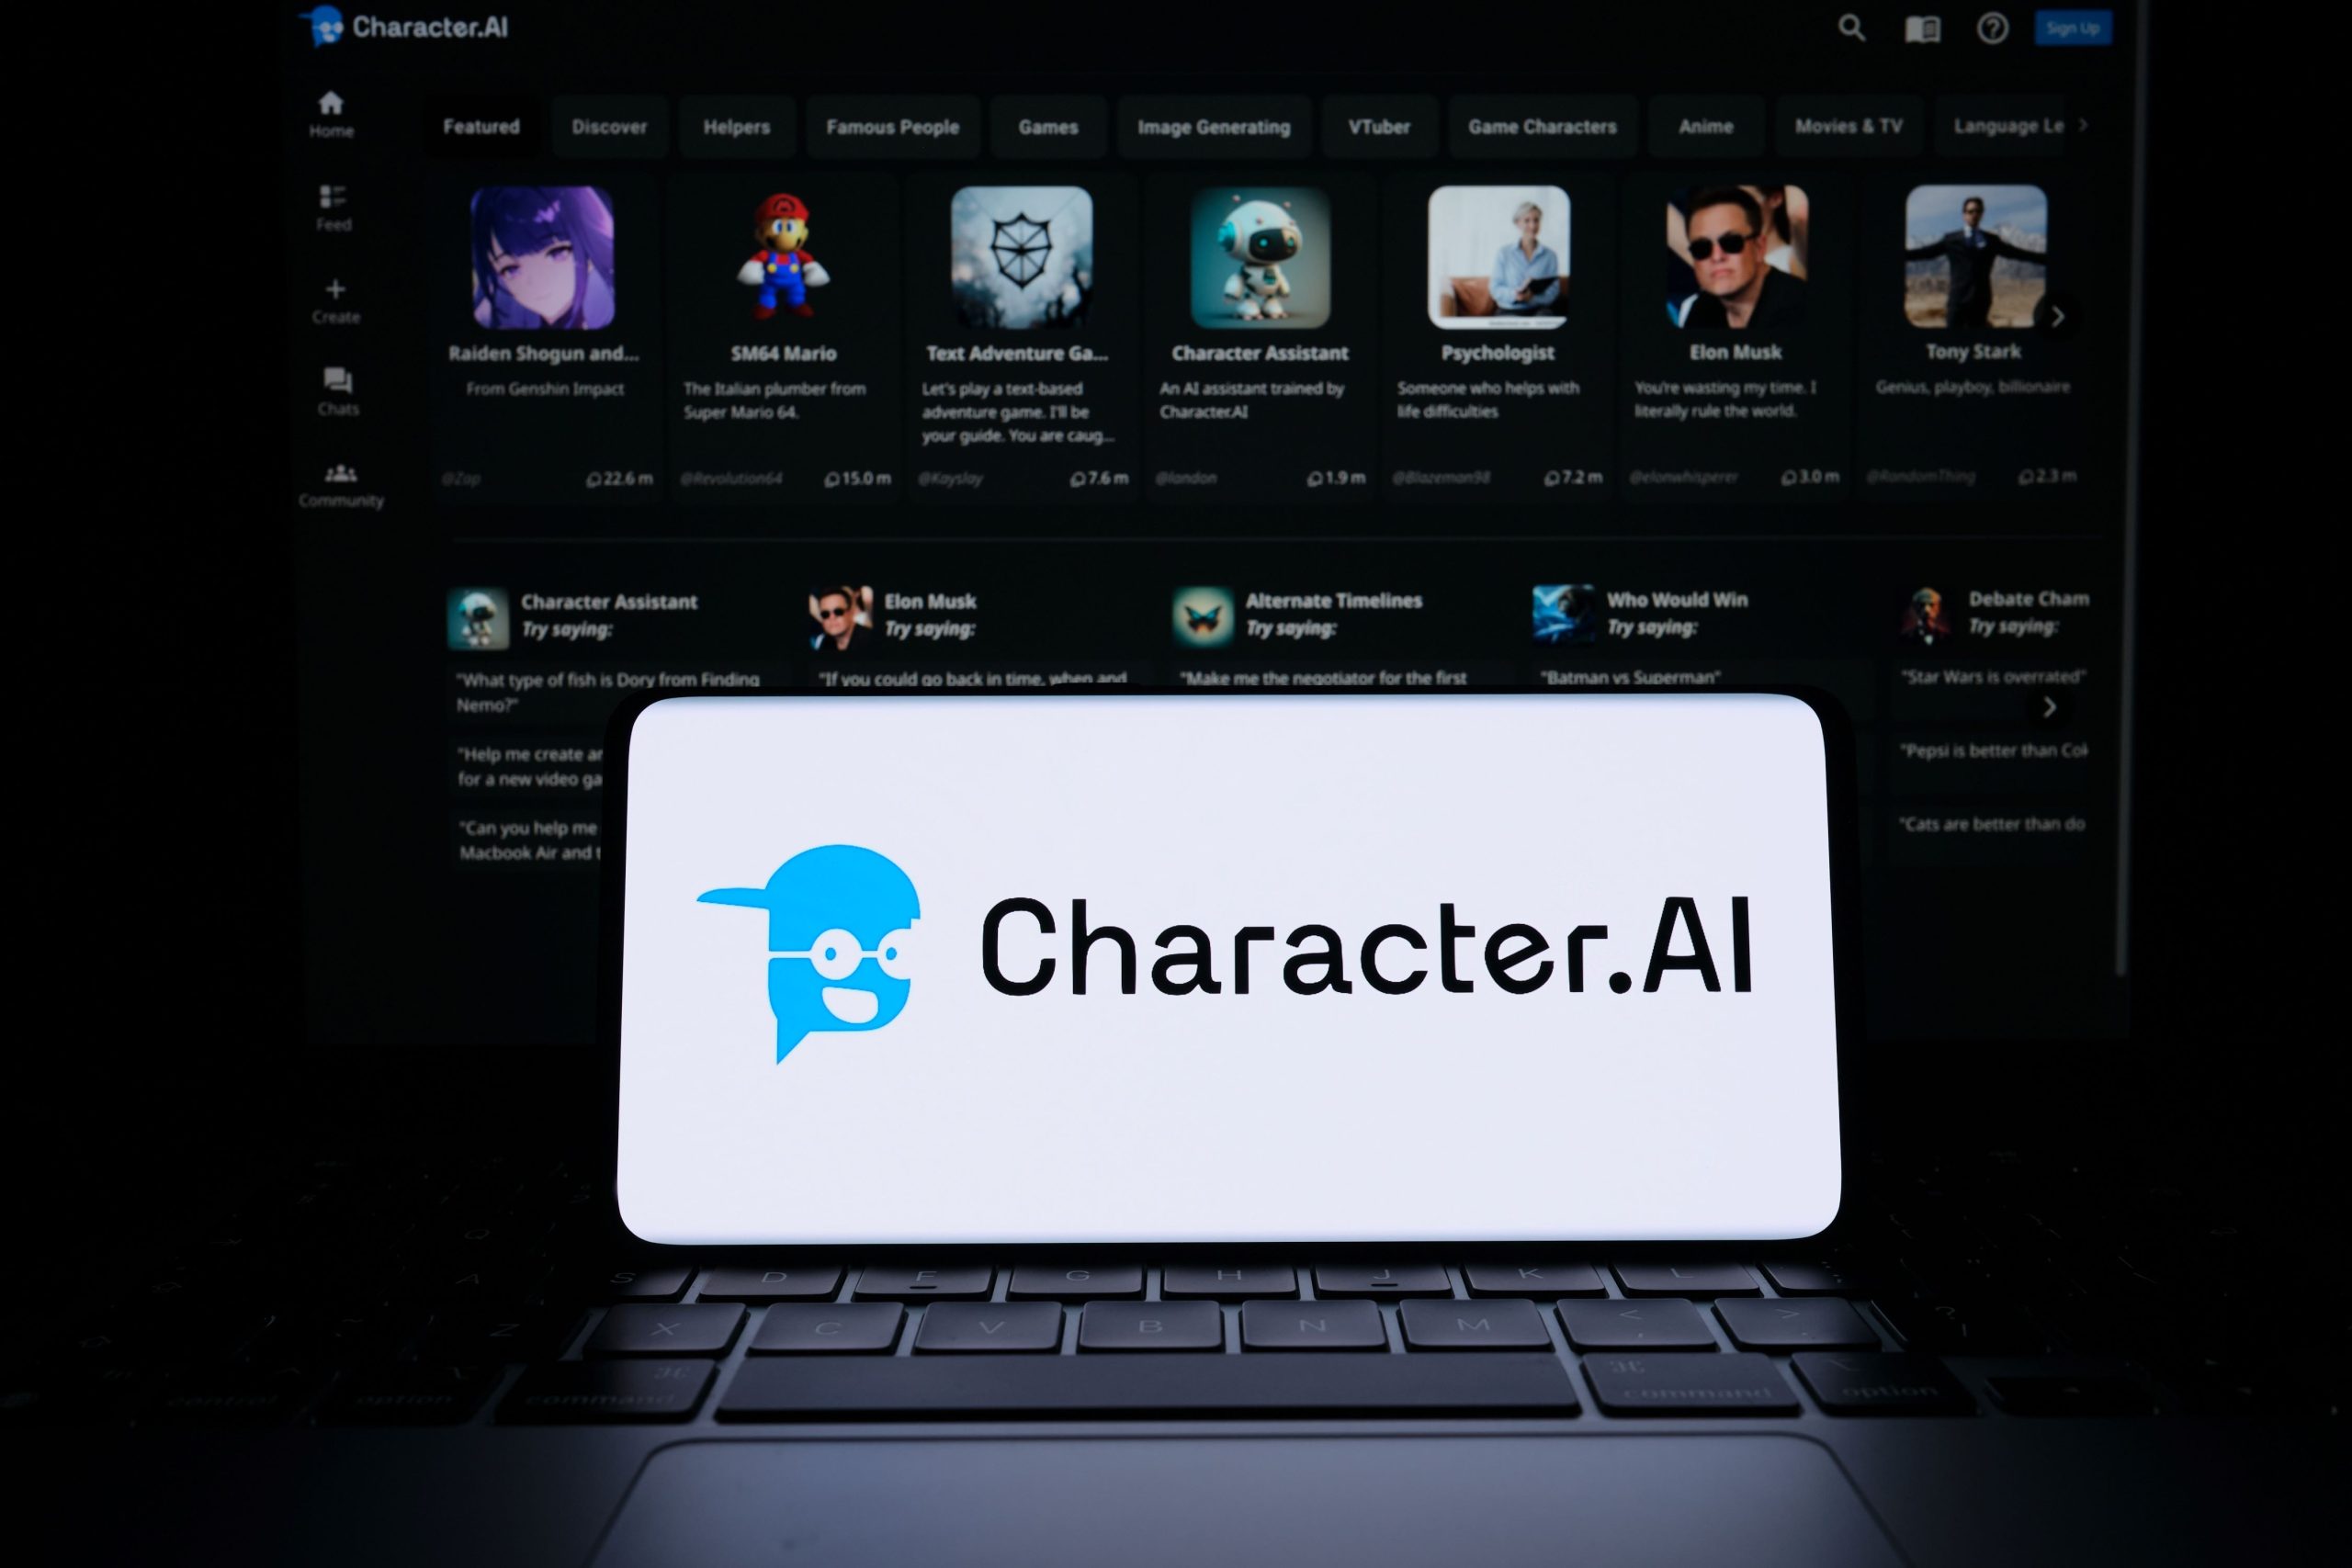 Character AI vs ChatGPT: Which is Better? (2023)